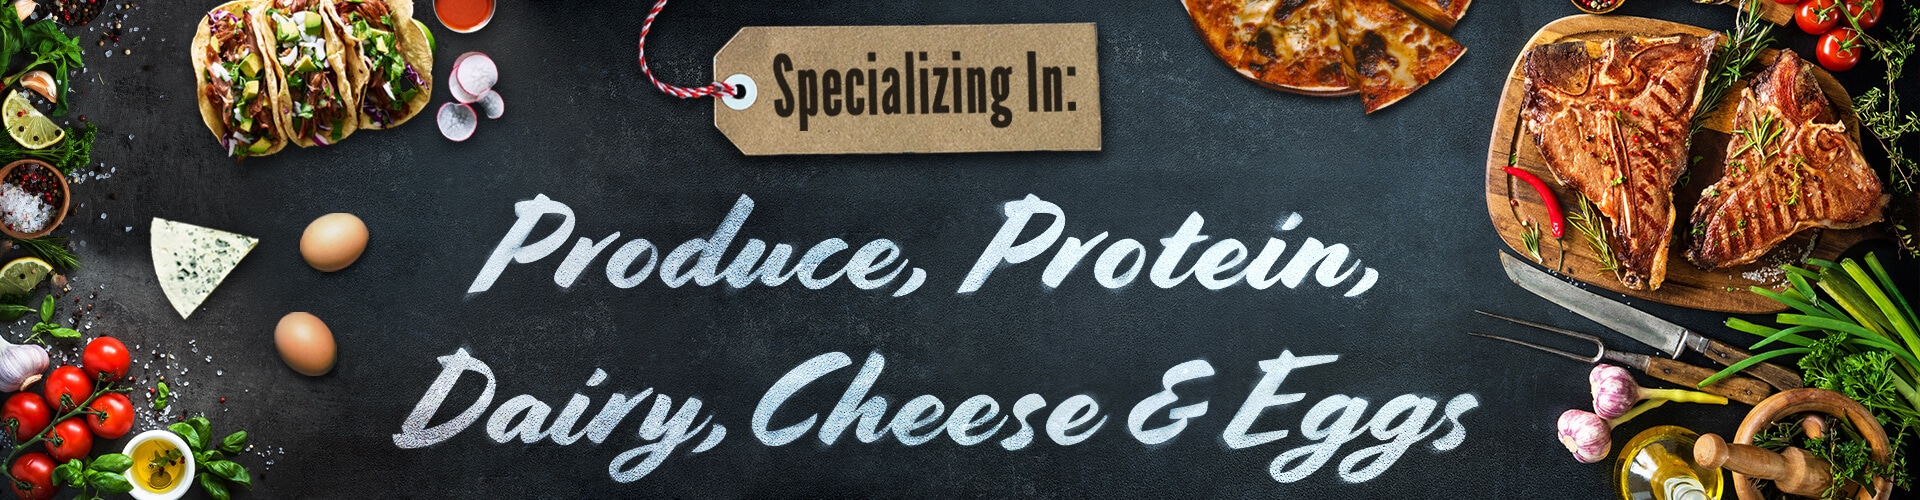 Produce, Protein, Dairy, Cheese & Eggs banner